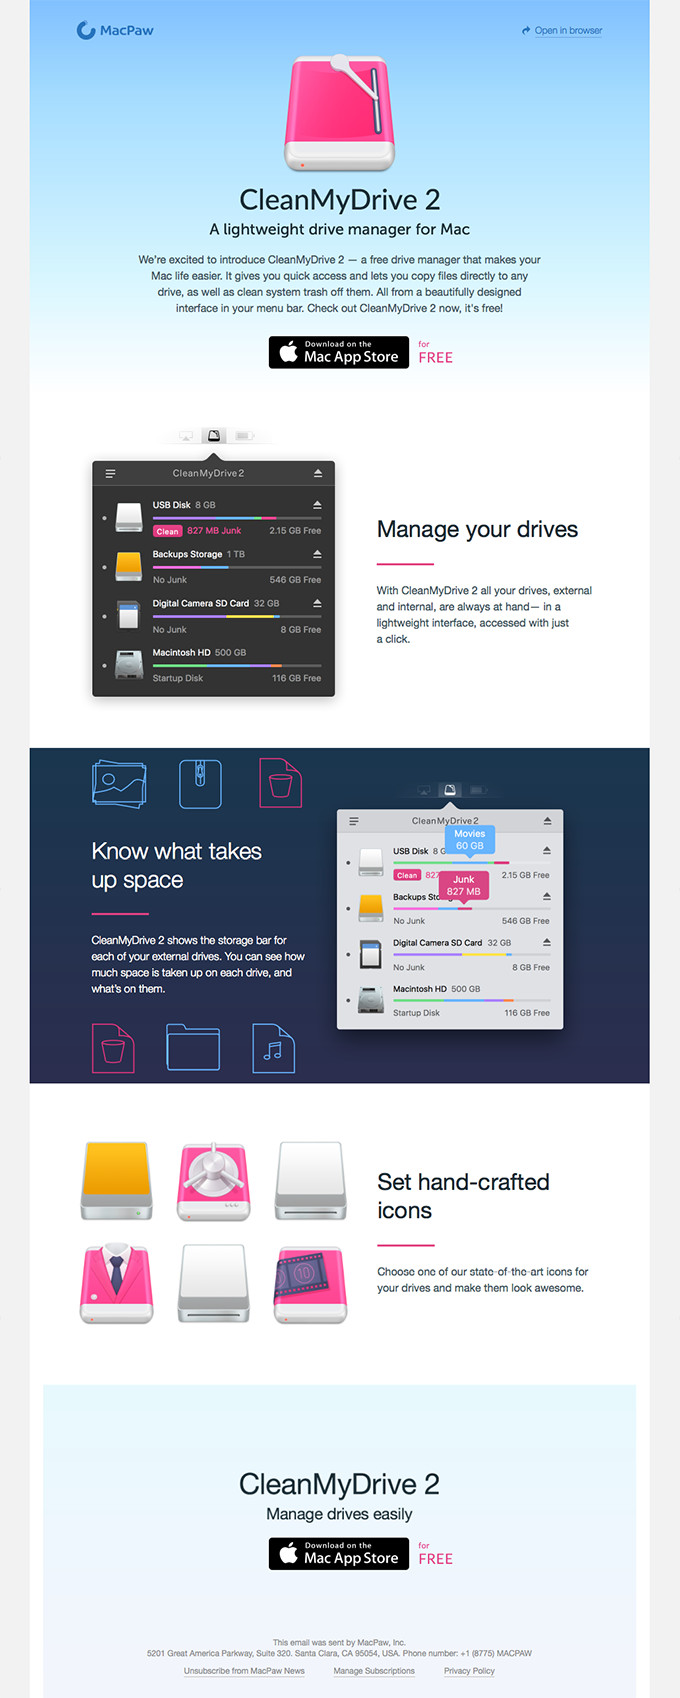 CleanMyDrive 2 | Clean and manage your drives easily